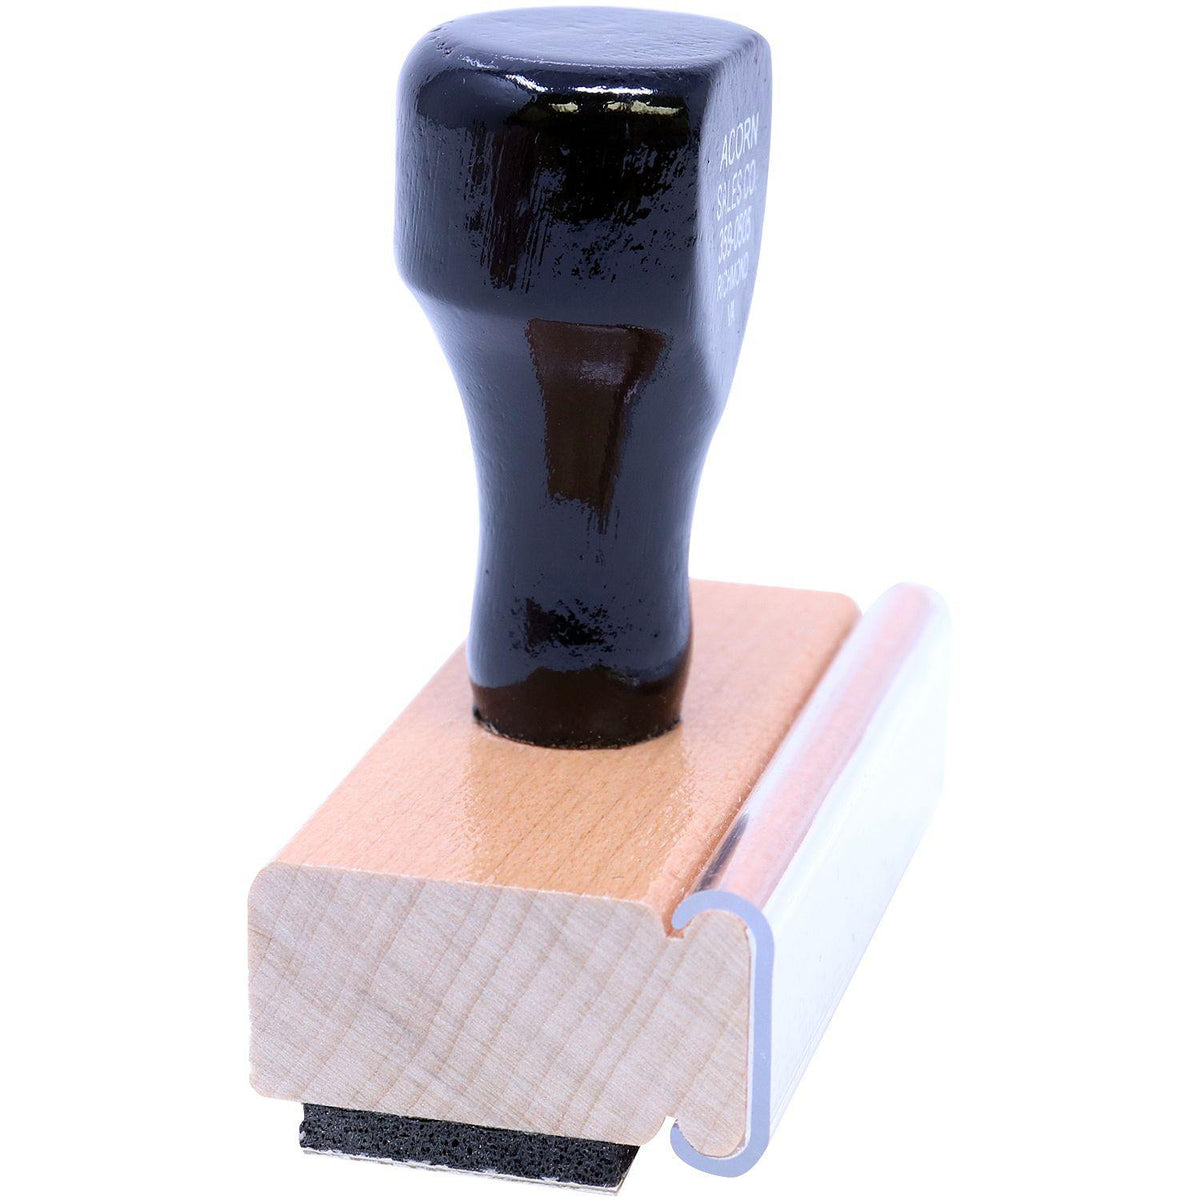 Side View of Large Covid-19 Test Pending Rubber Stamp at an Angle